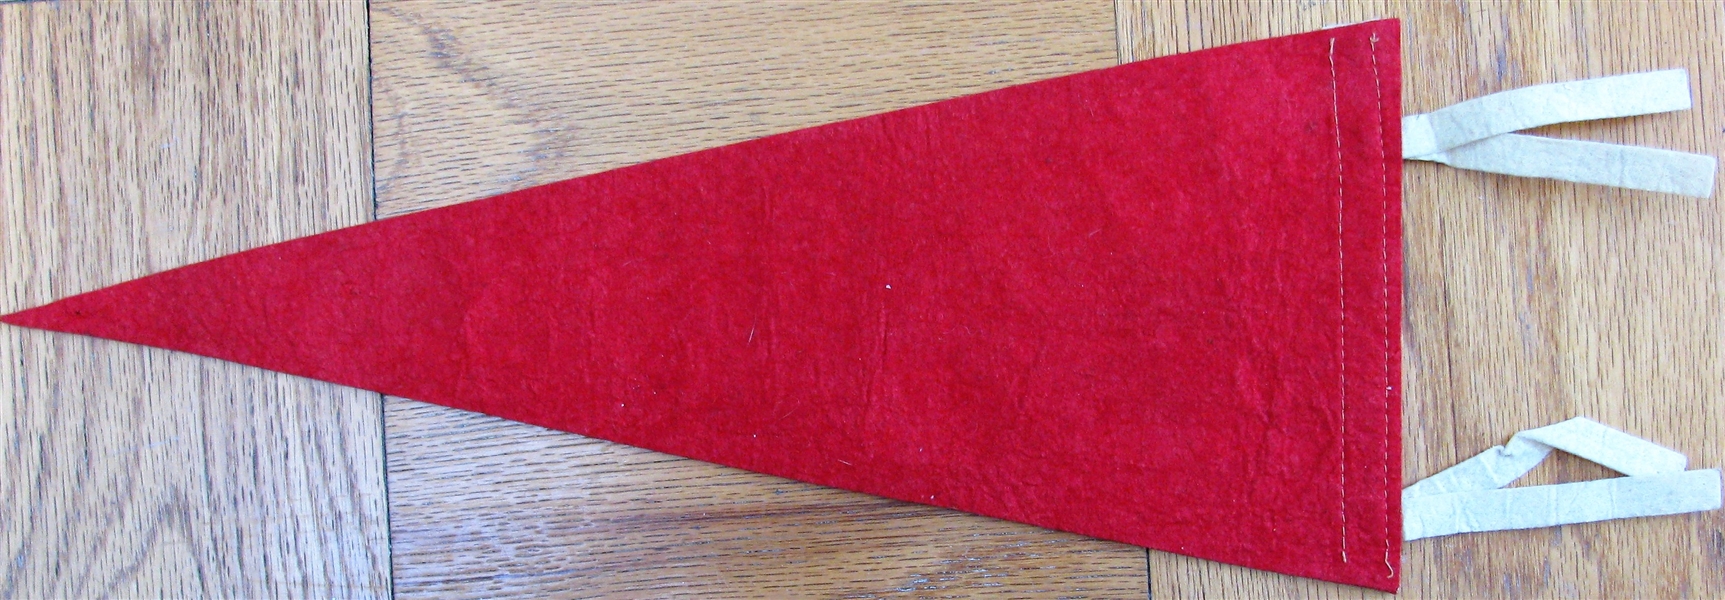 1950 RED SOX PENNANT